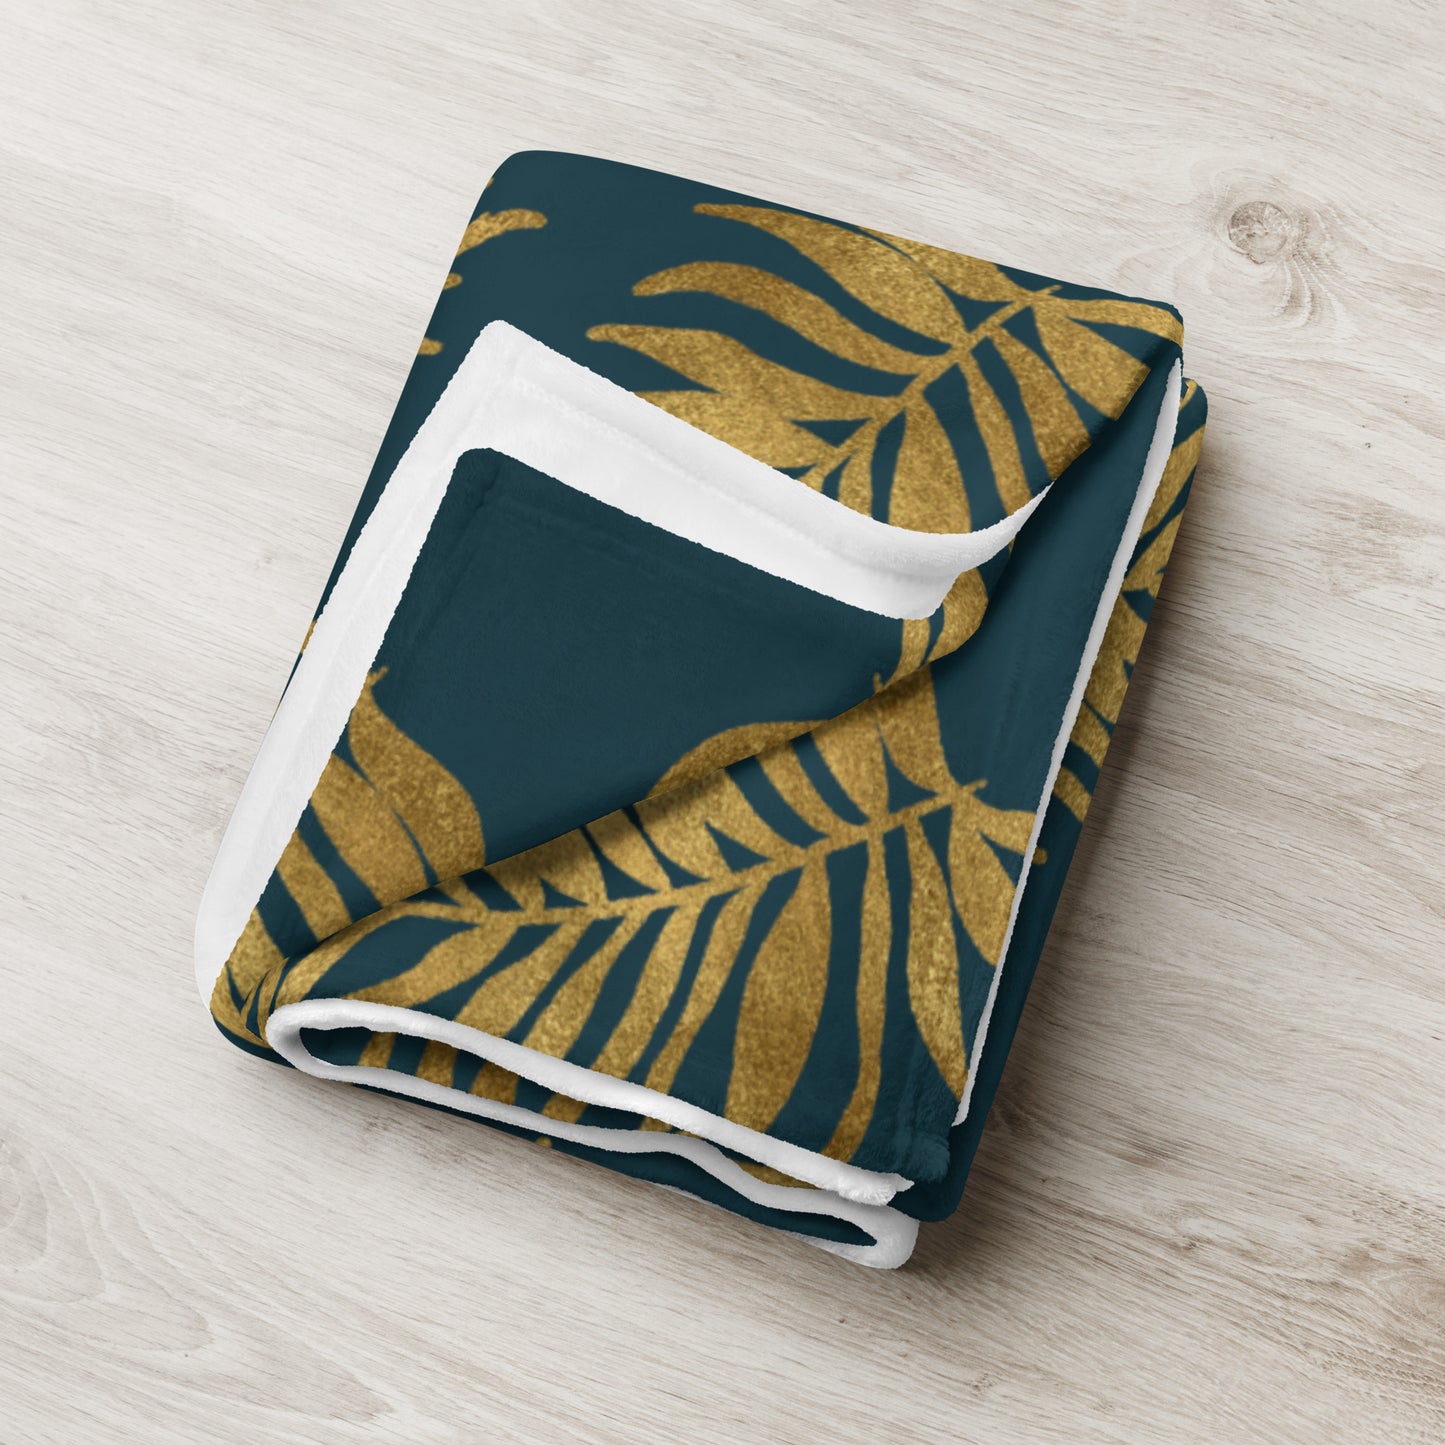 Throw Blanket - Palm Leaves in Gold and Teal